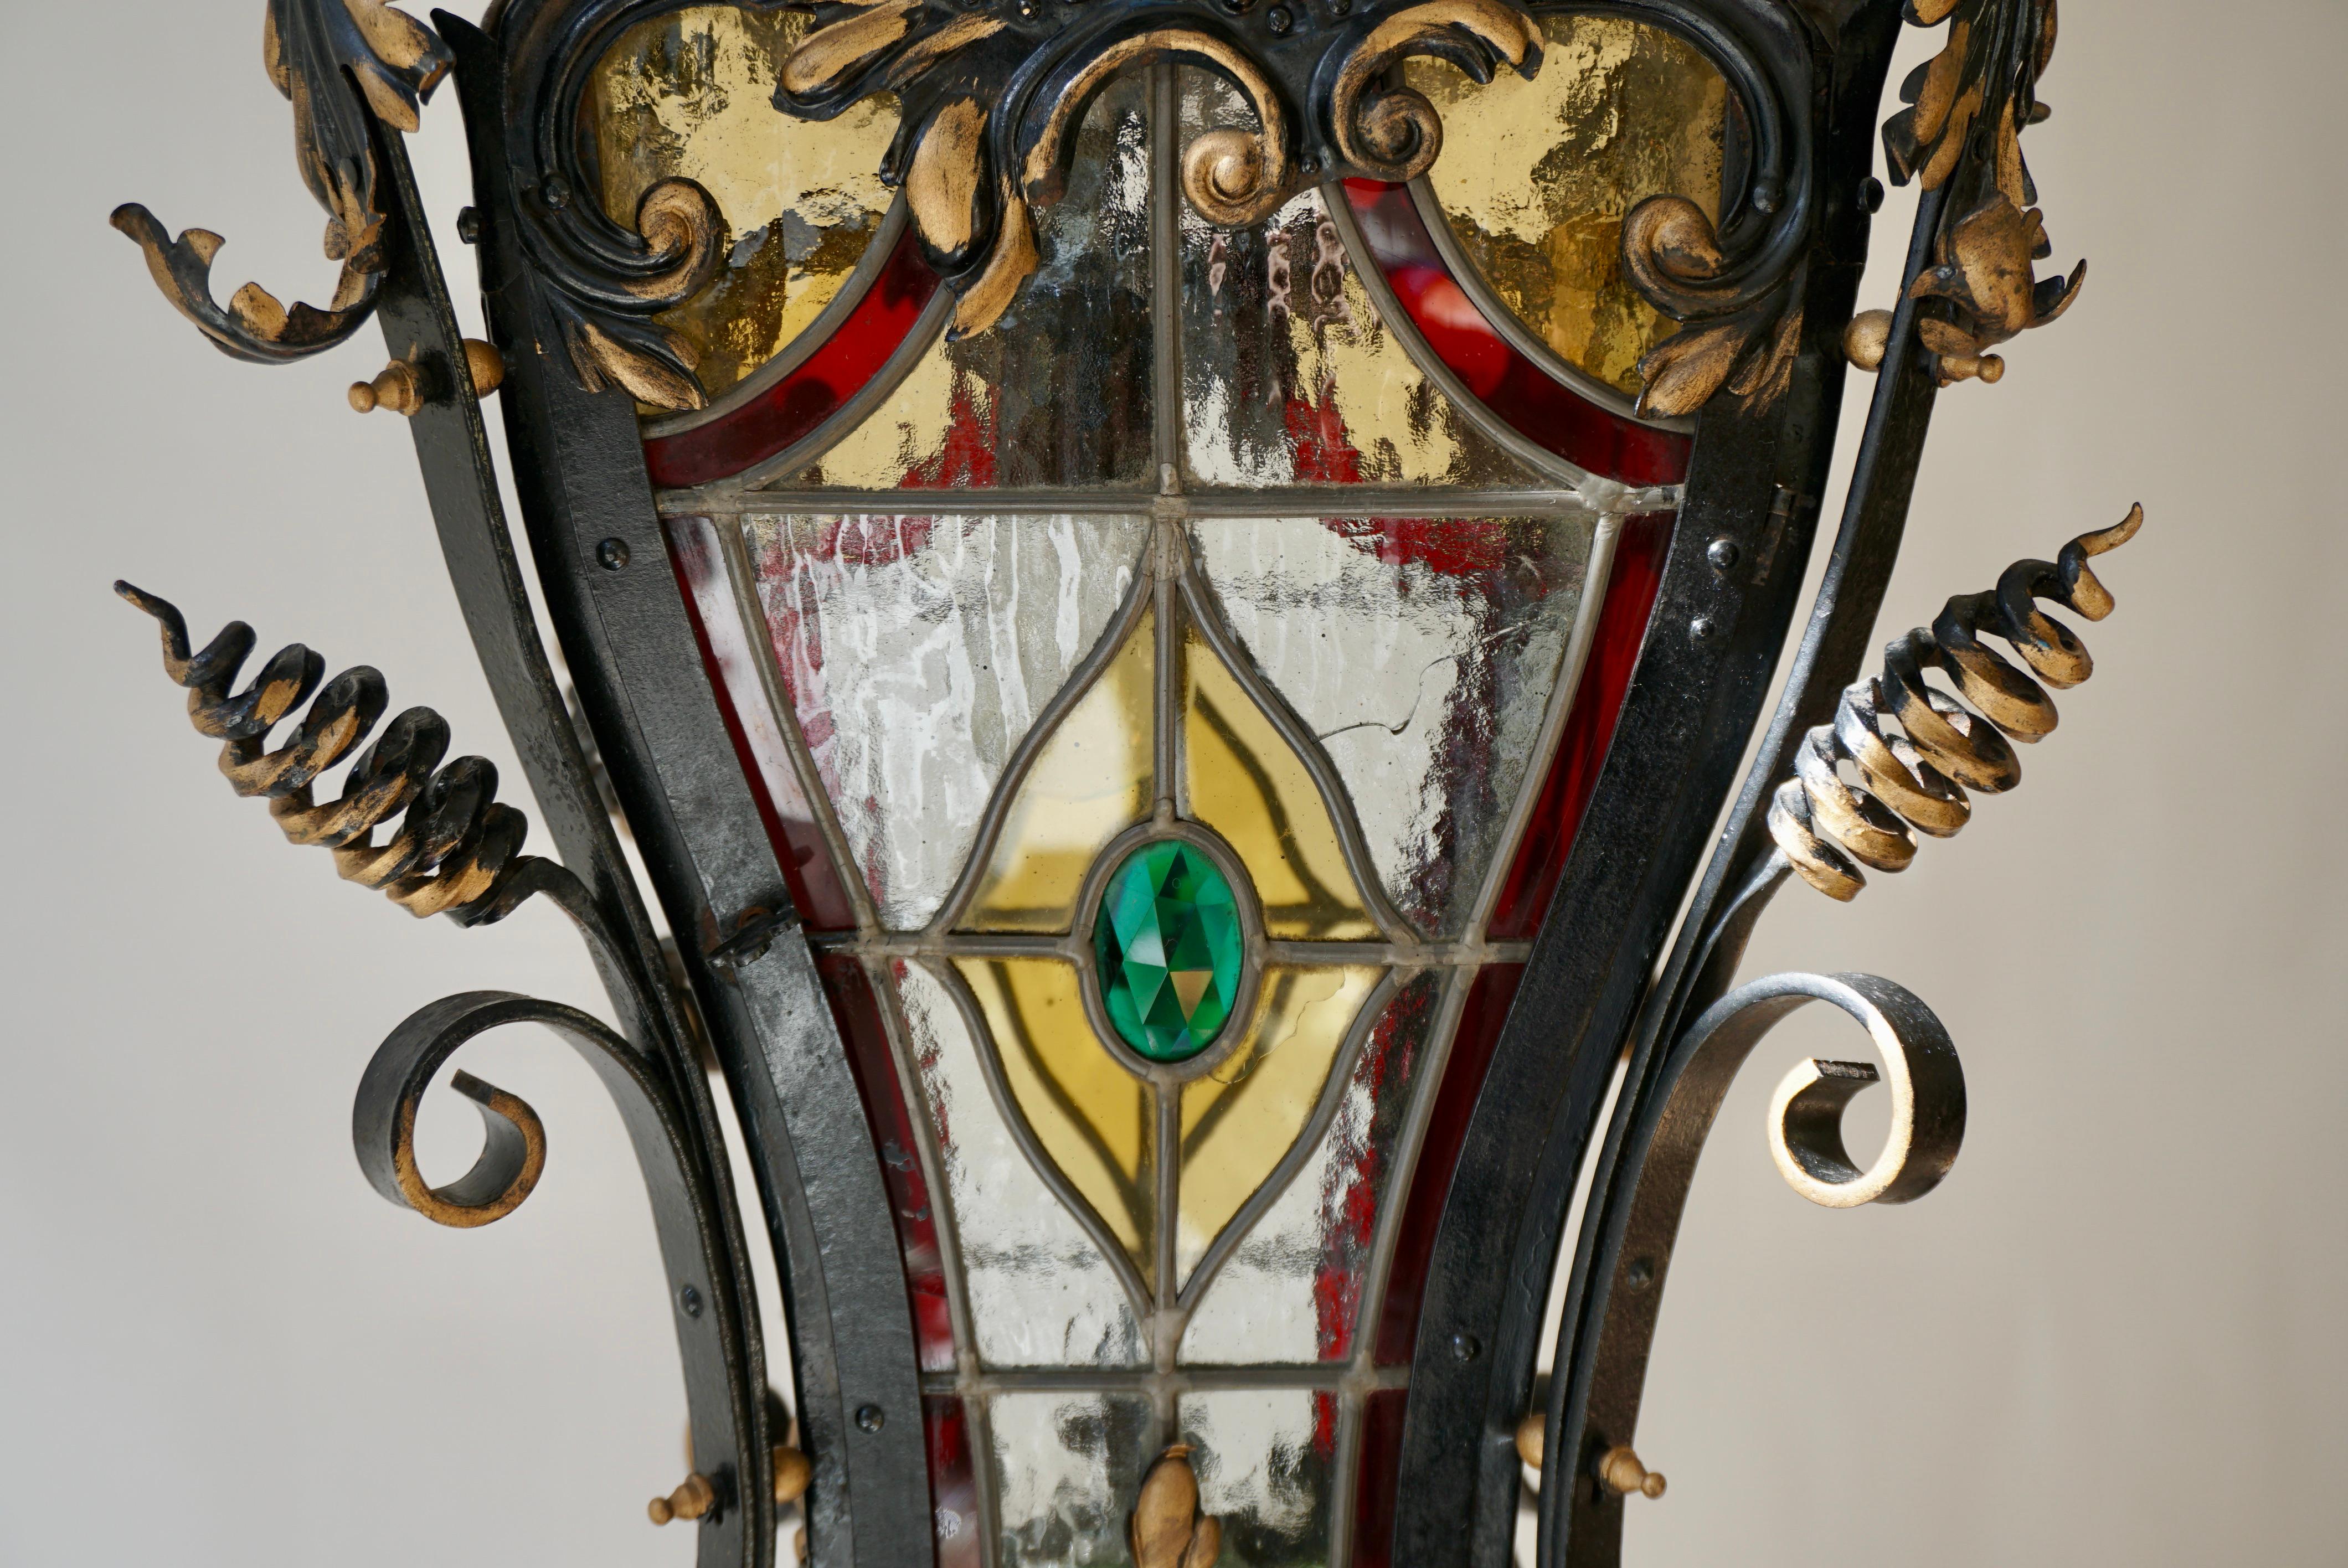  Italian Scrolled Wrought Iron and Stained Glass Hanging Hall Lantern, C. 1900 For Sale 4